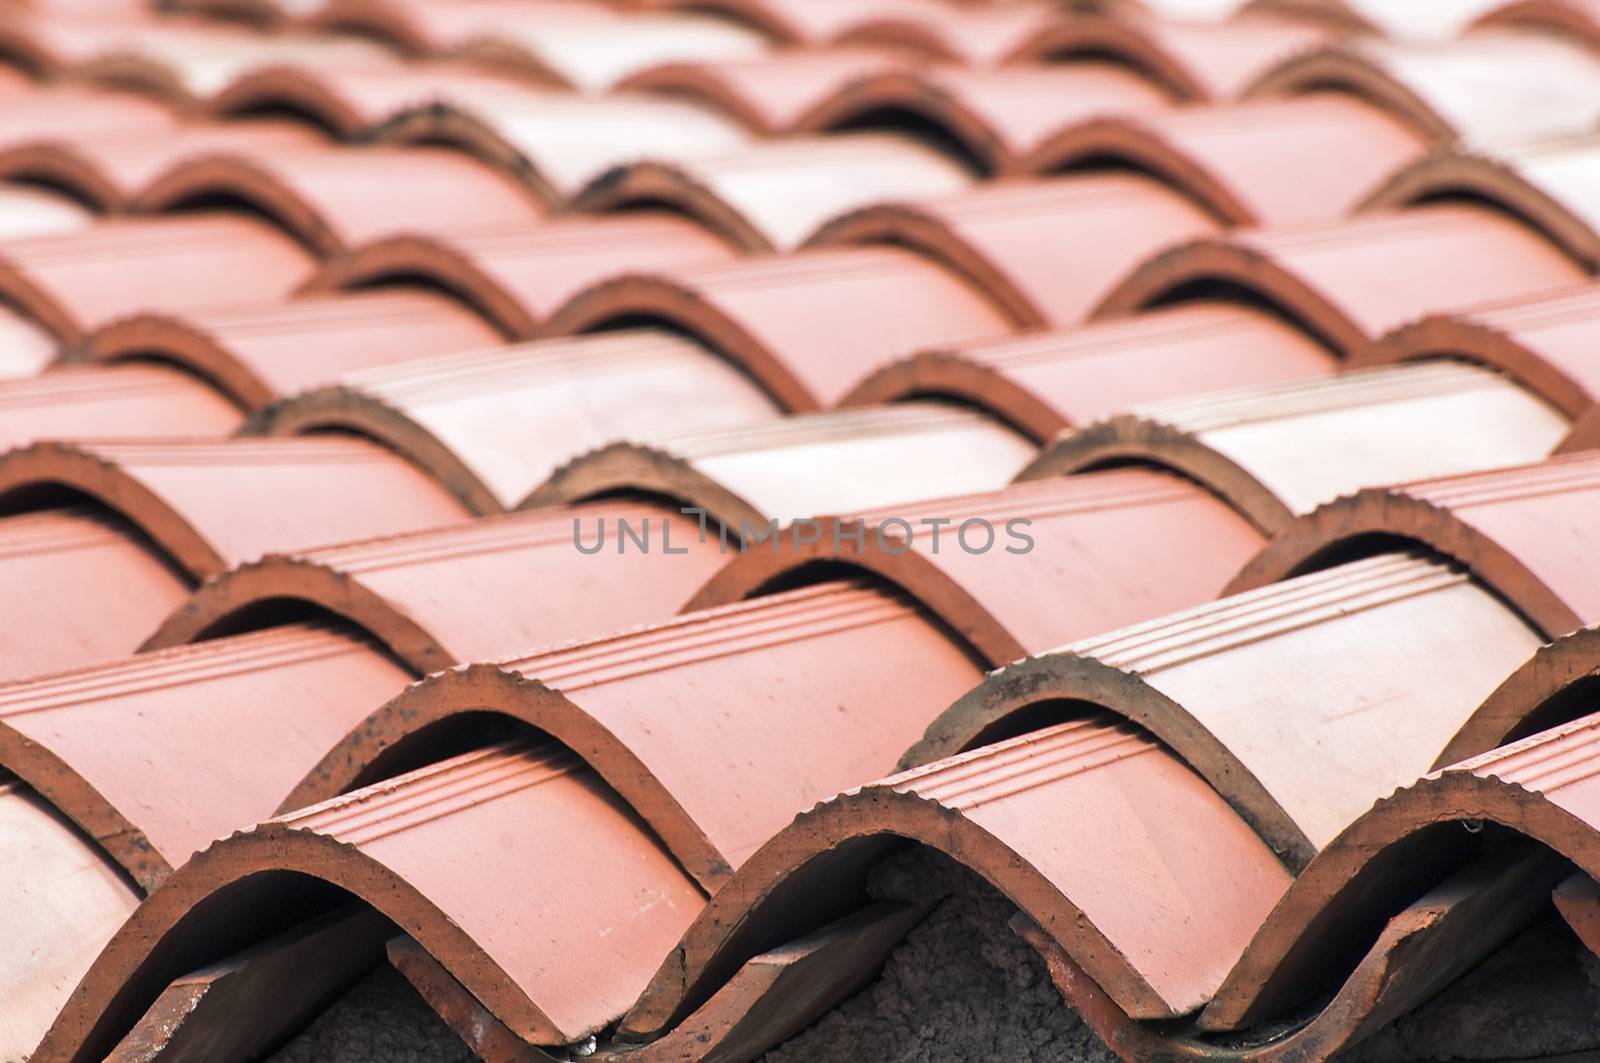 Roof tiles by lebanmax